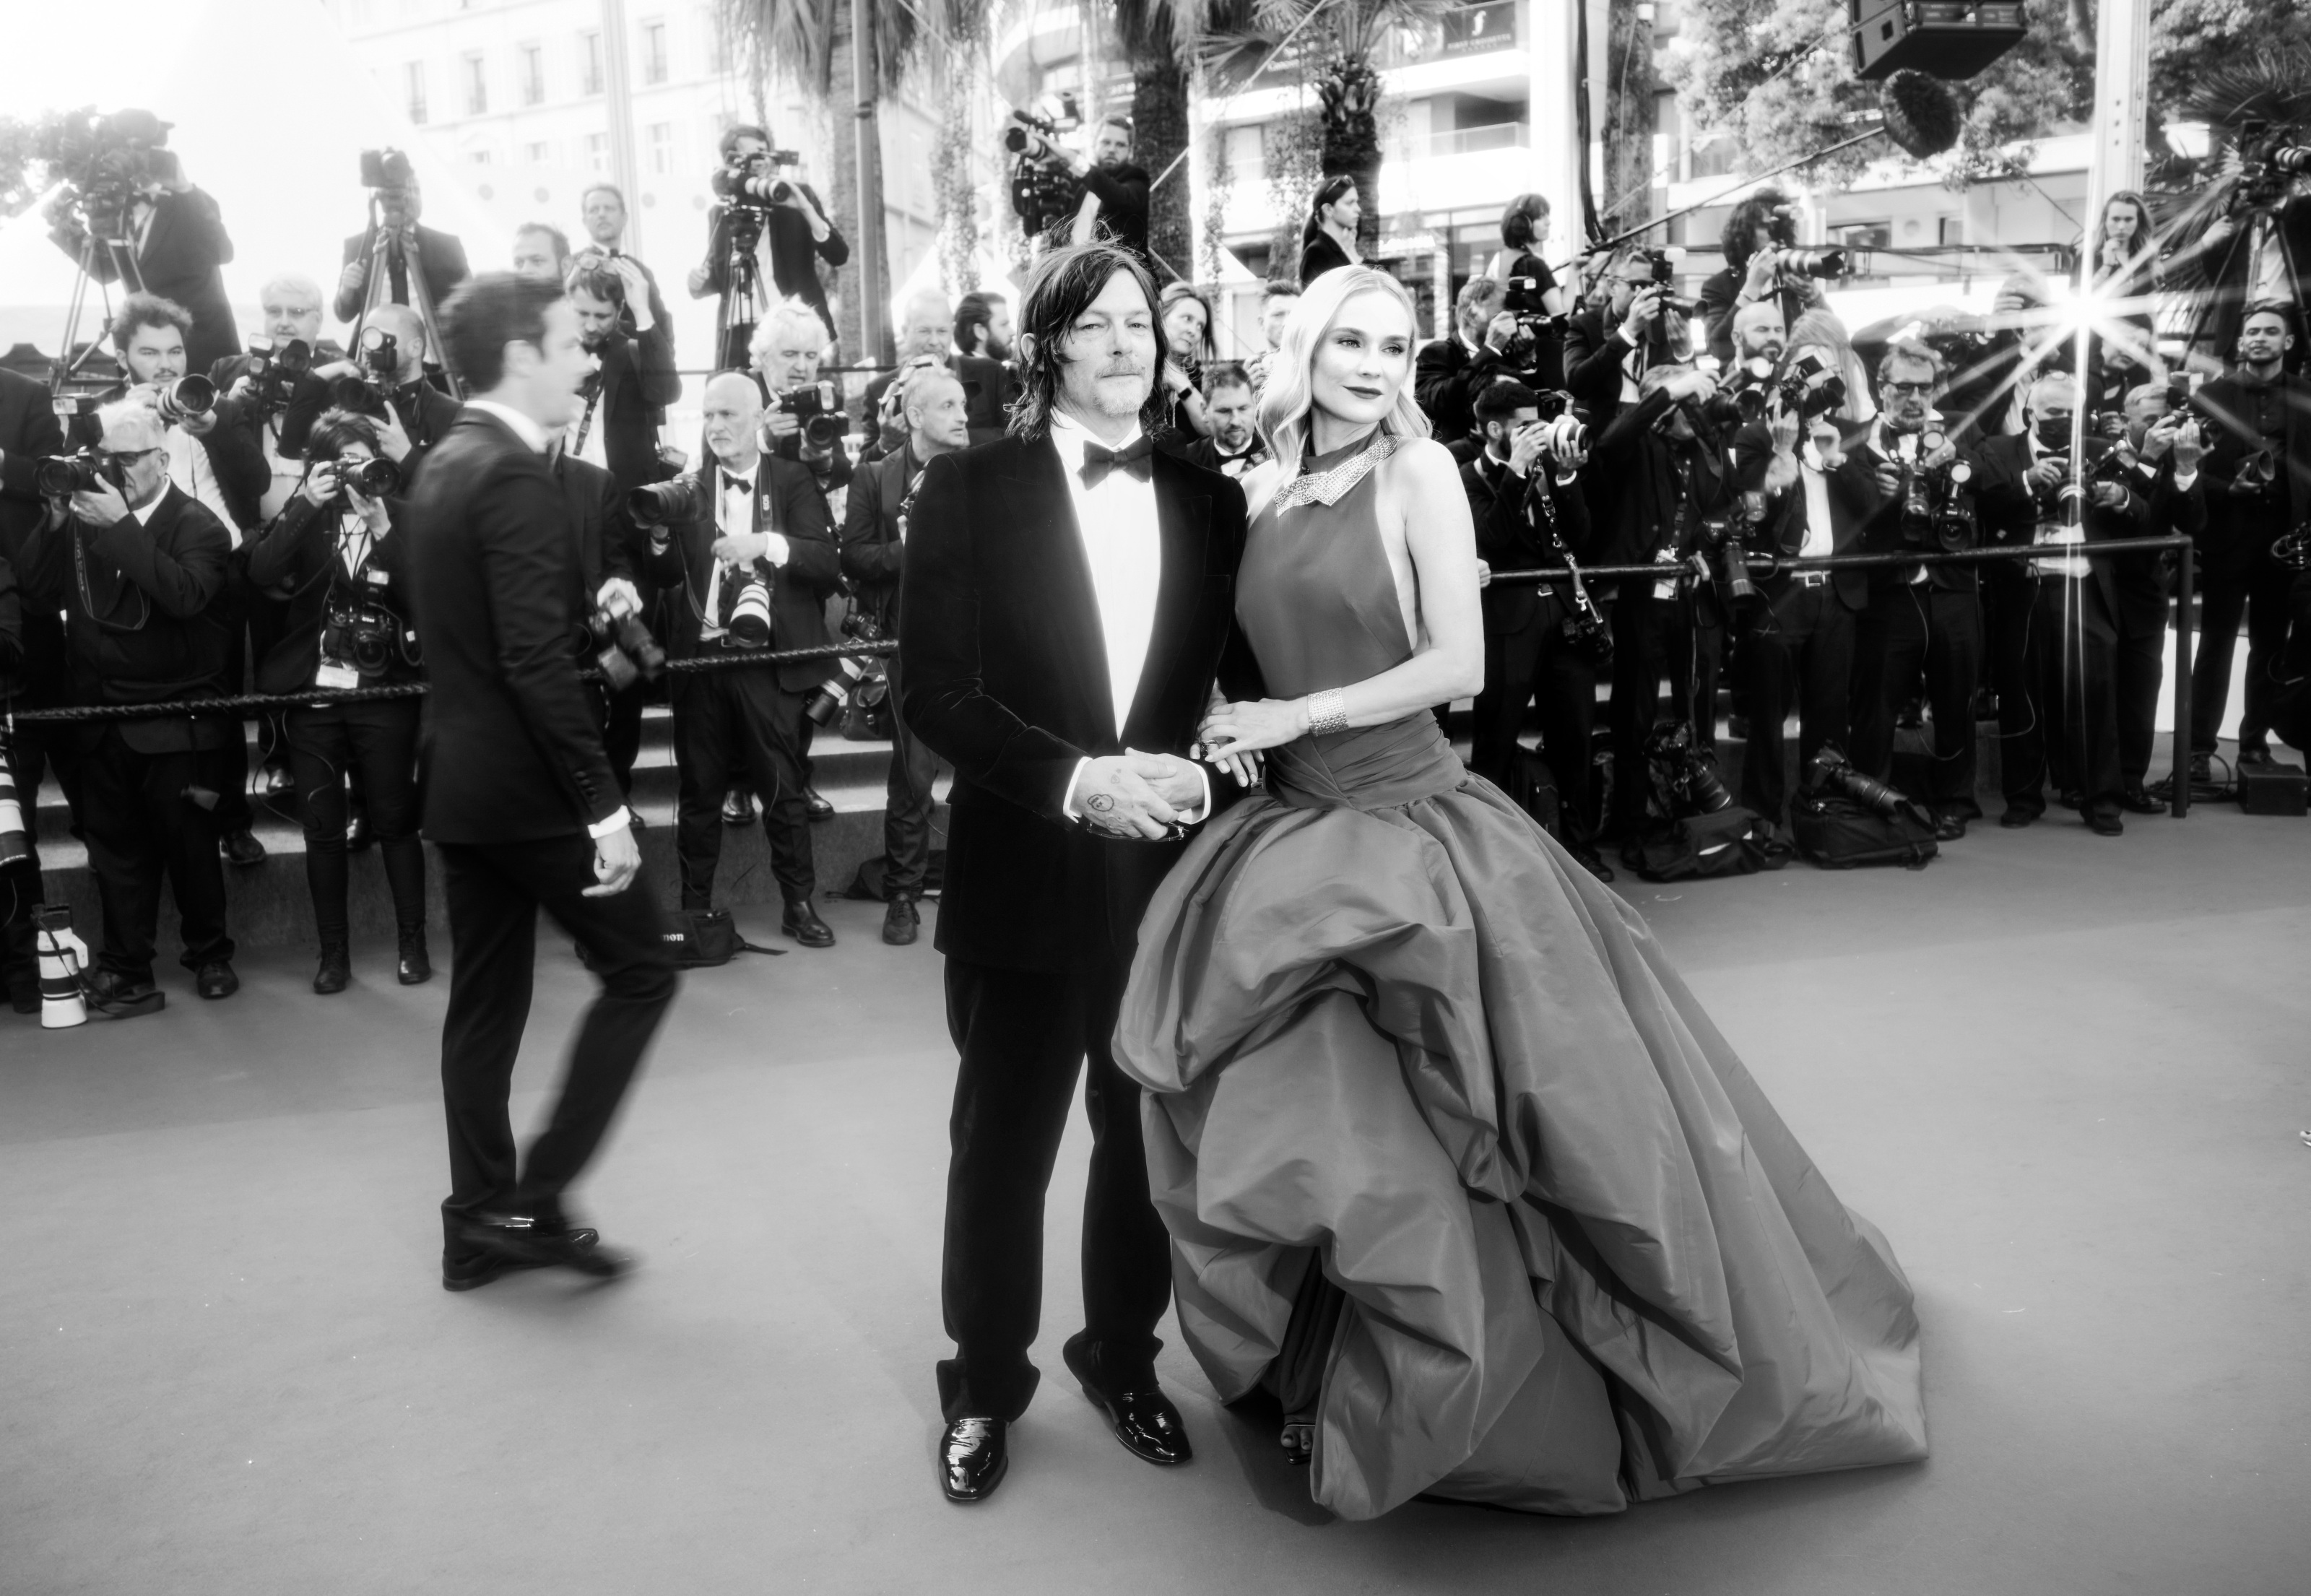 Diane Kruger and Norman Reedus Are Engaged